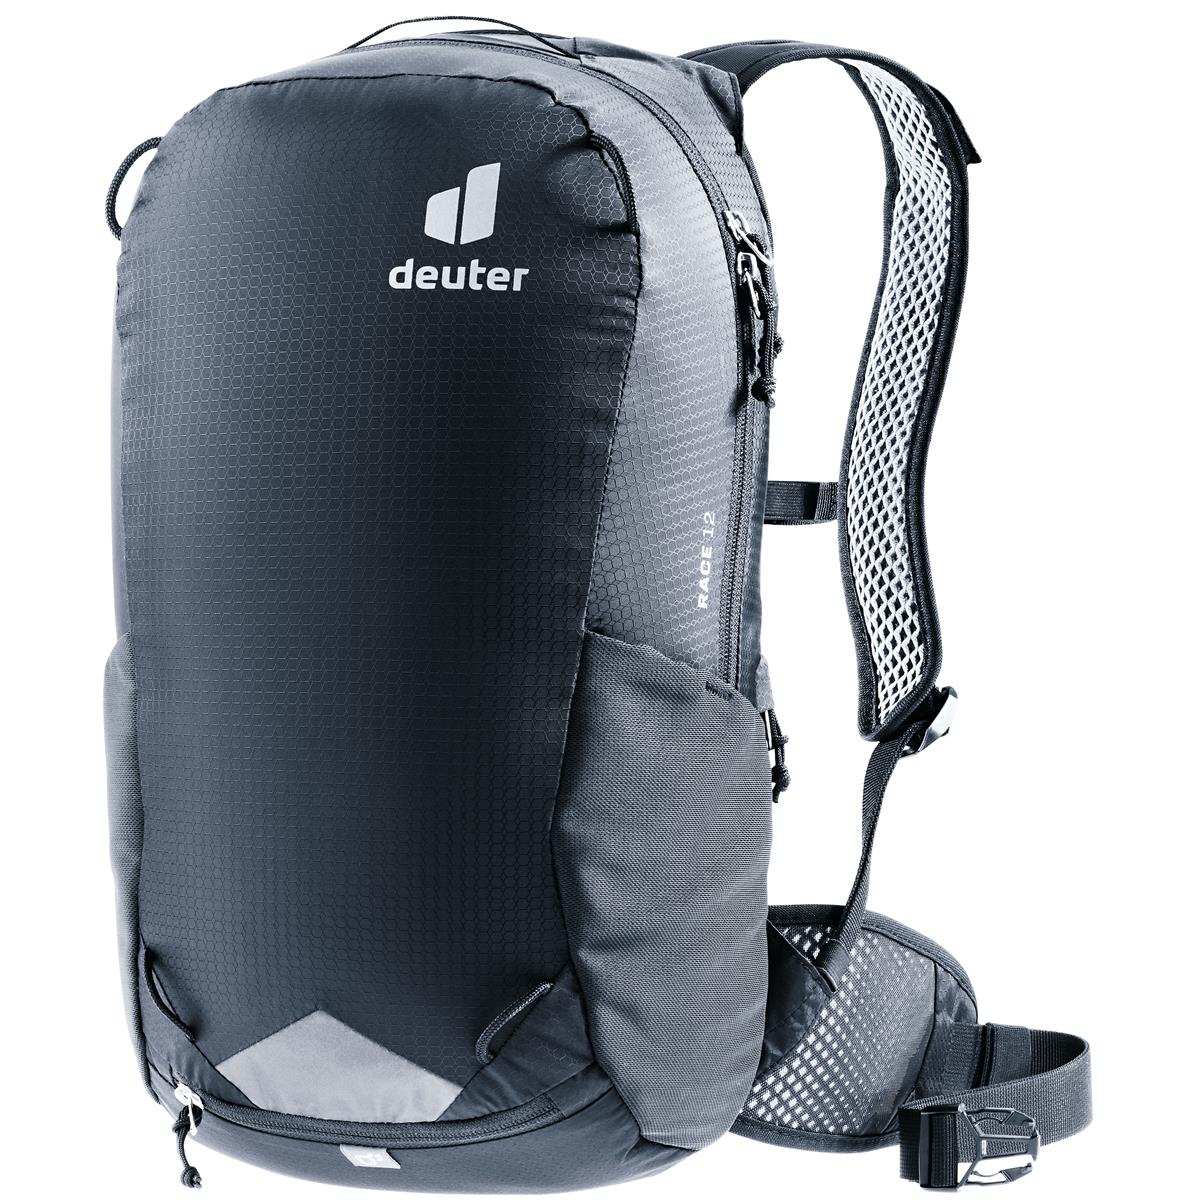 Deuter MTB Backpack with Hydration System Compartment Race 12 12L - Black